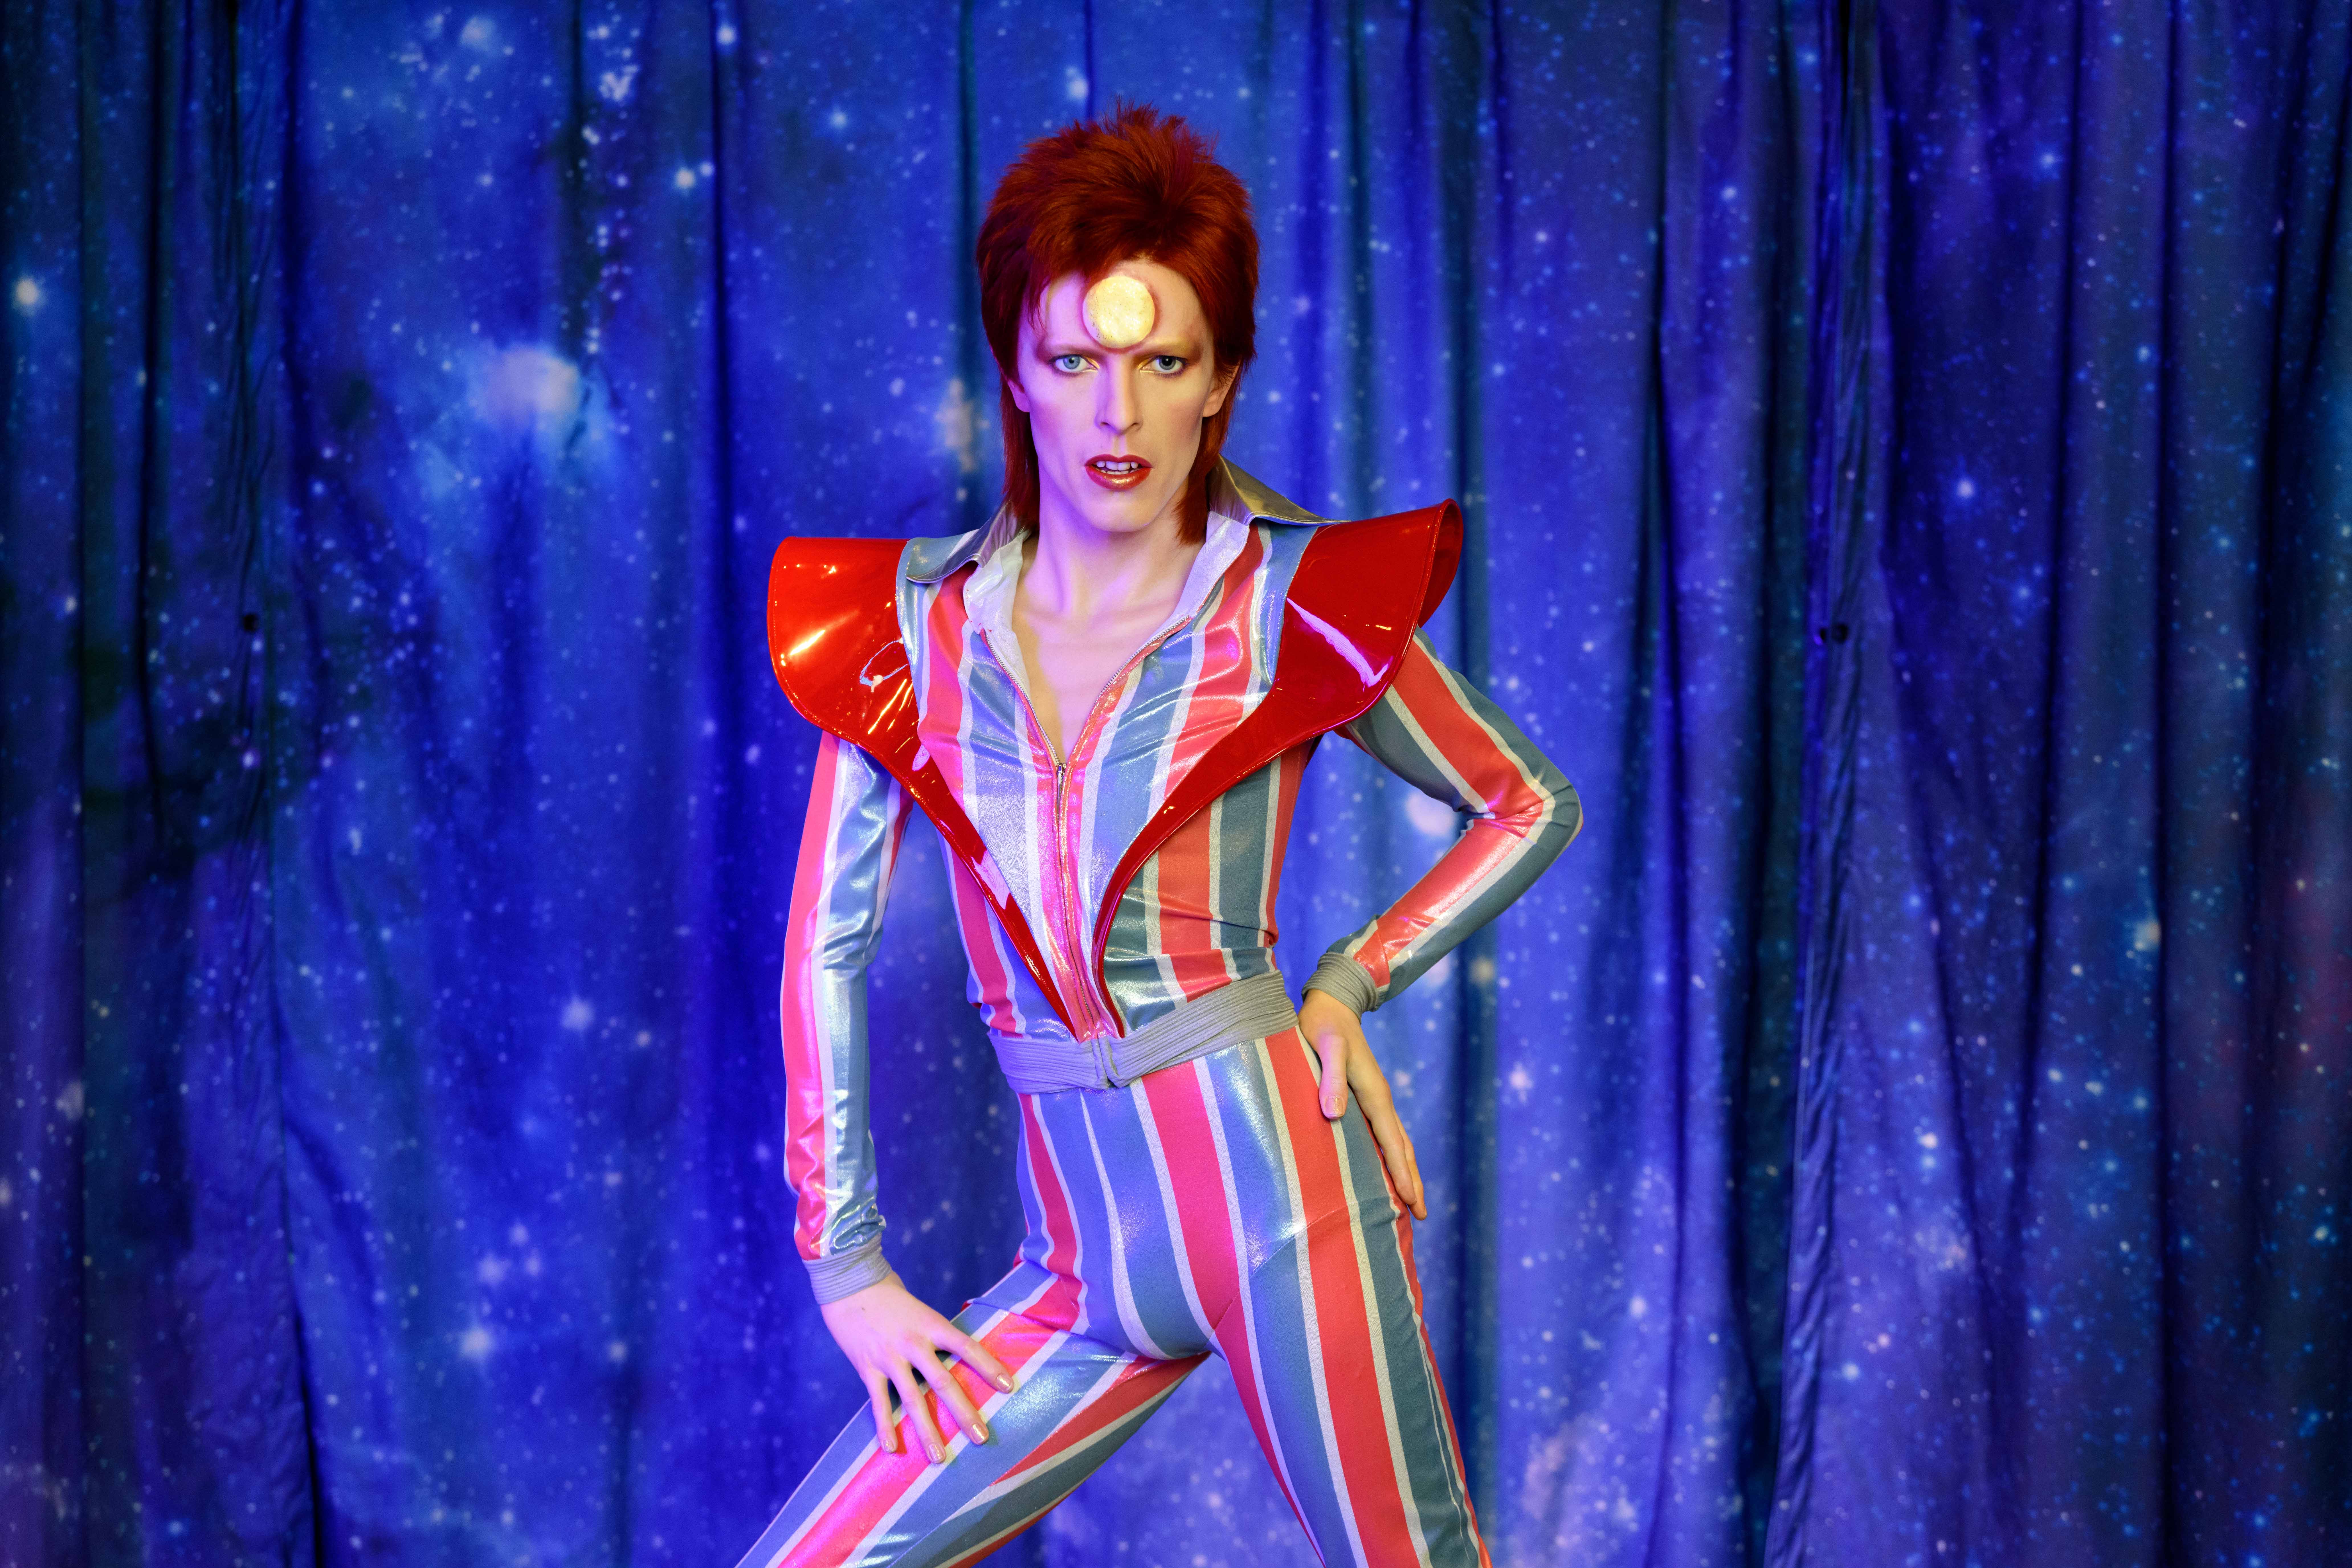 David Bowie Figure Unveiled At Madame Tussauds London 31.03 (10)